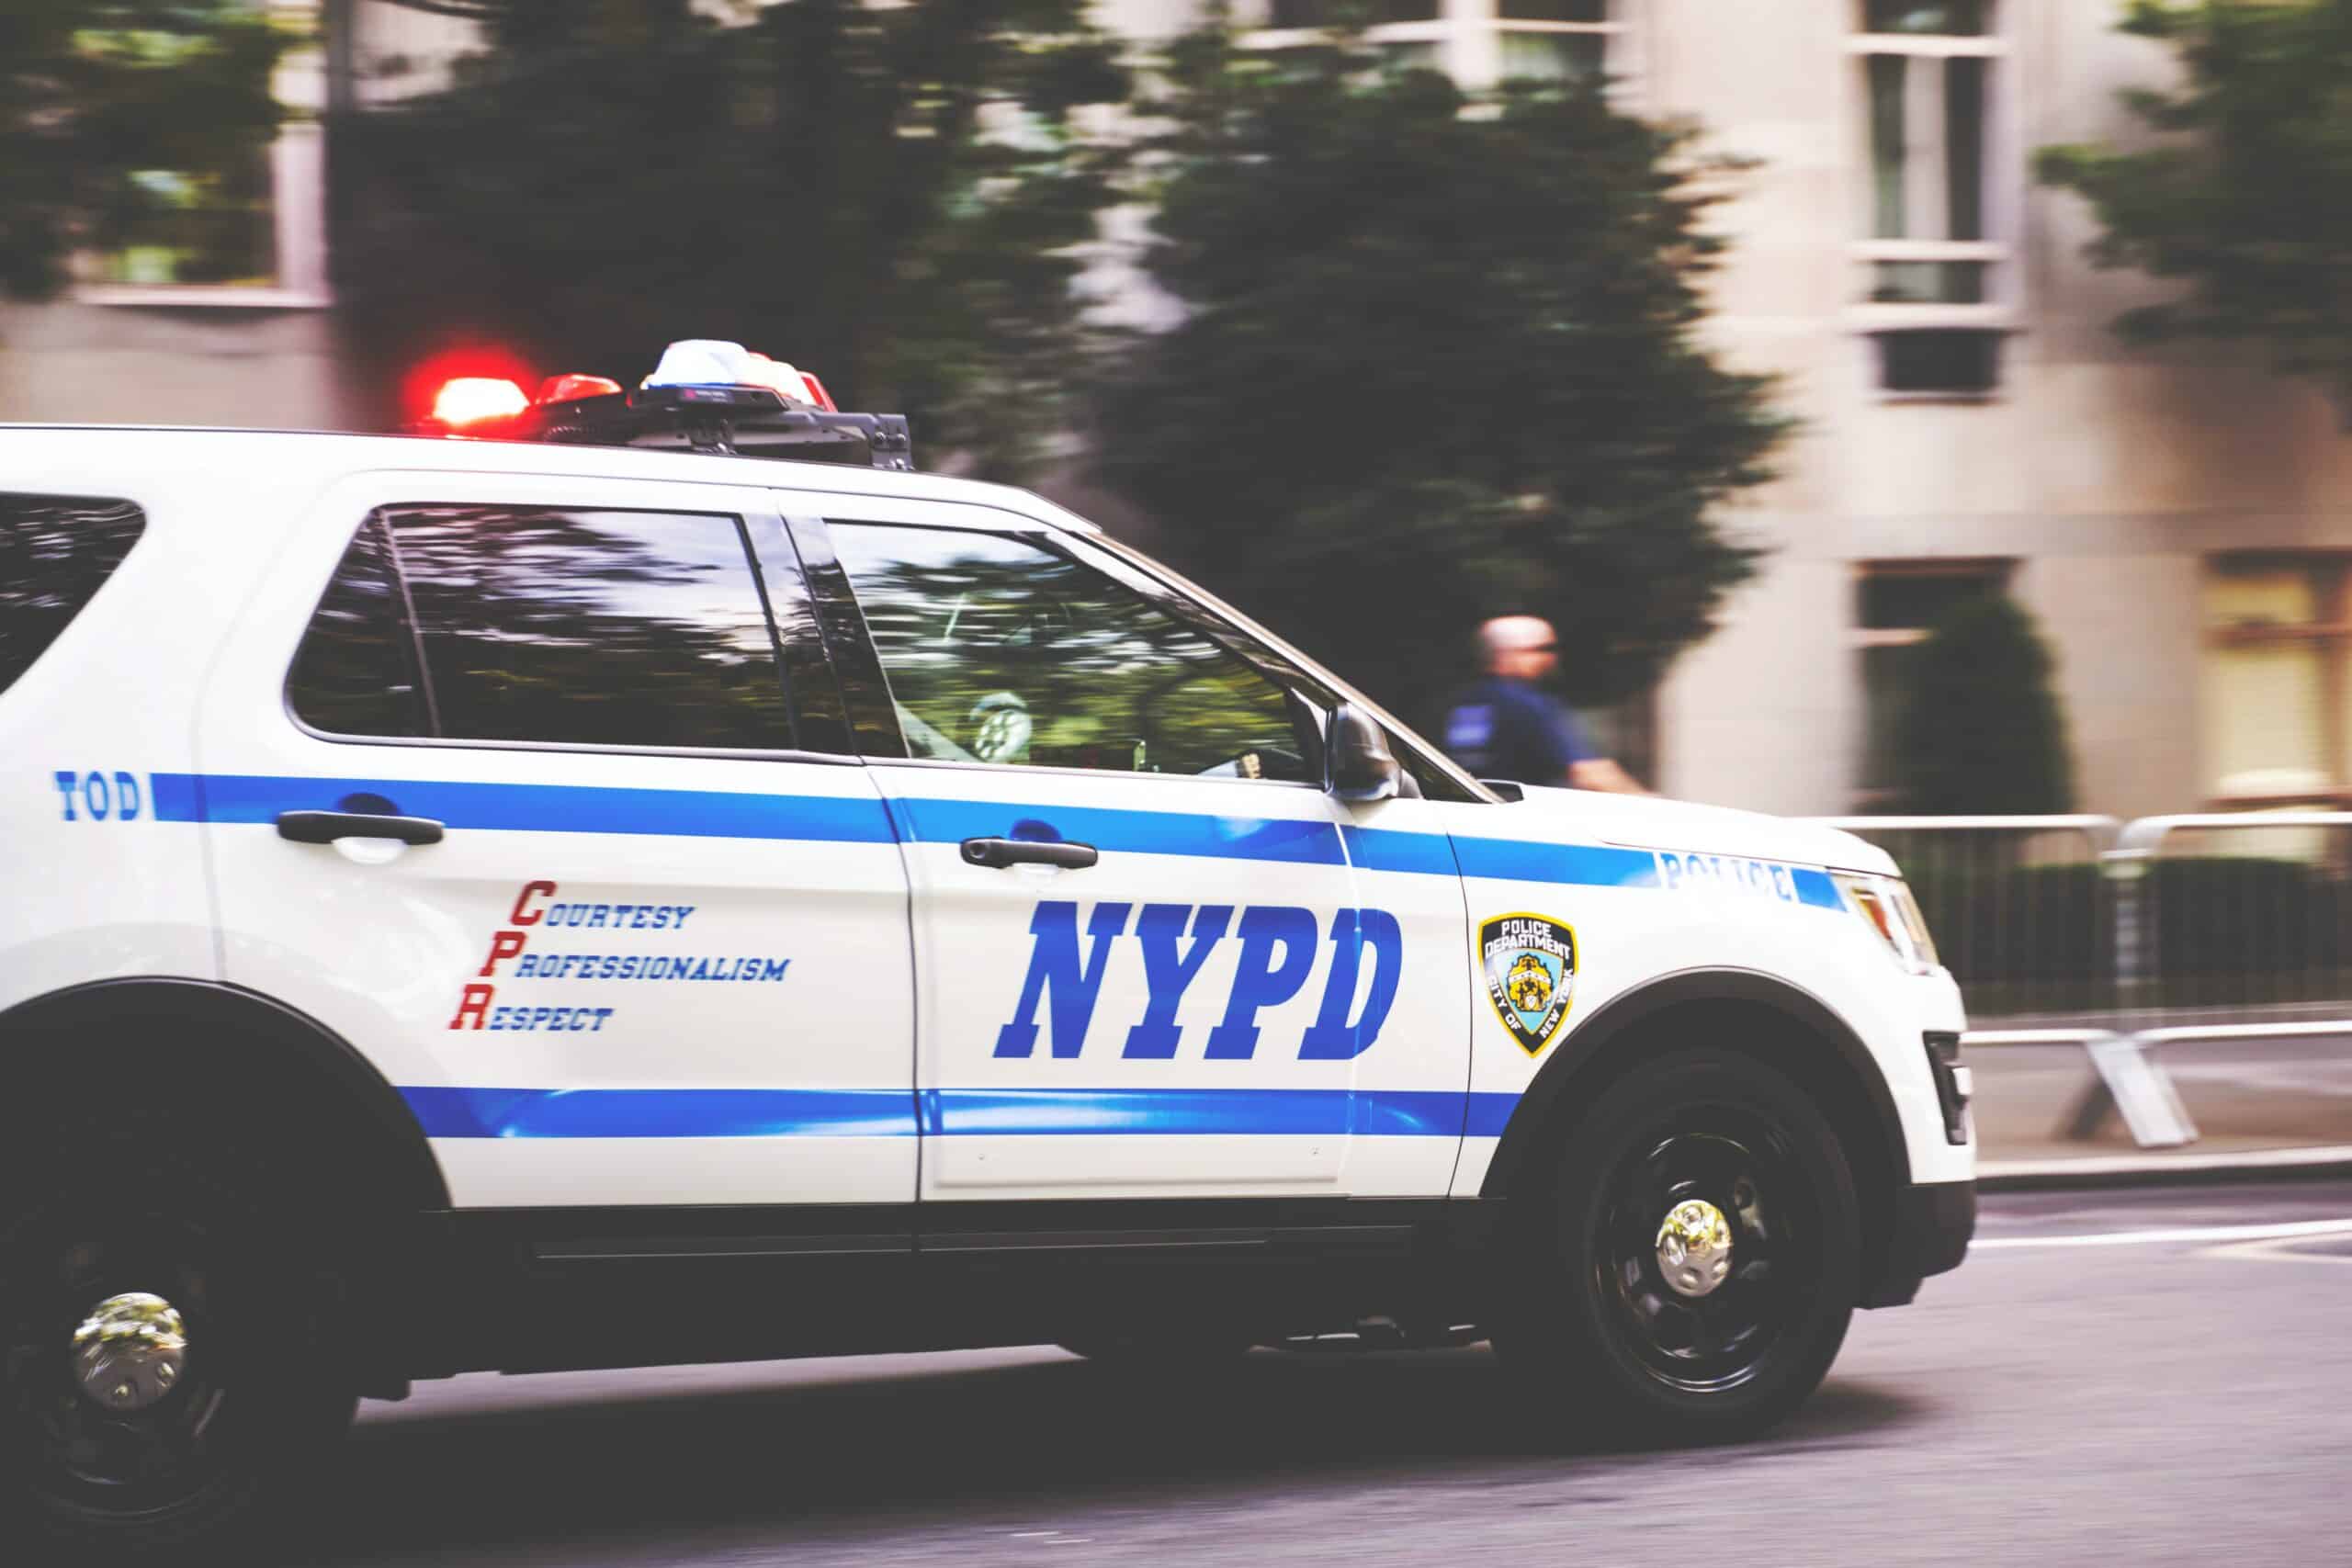 sergeant special assignment nypd